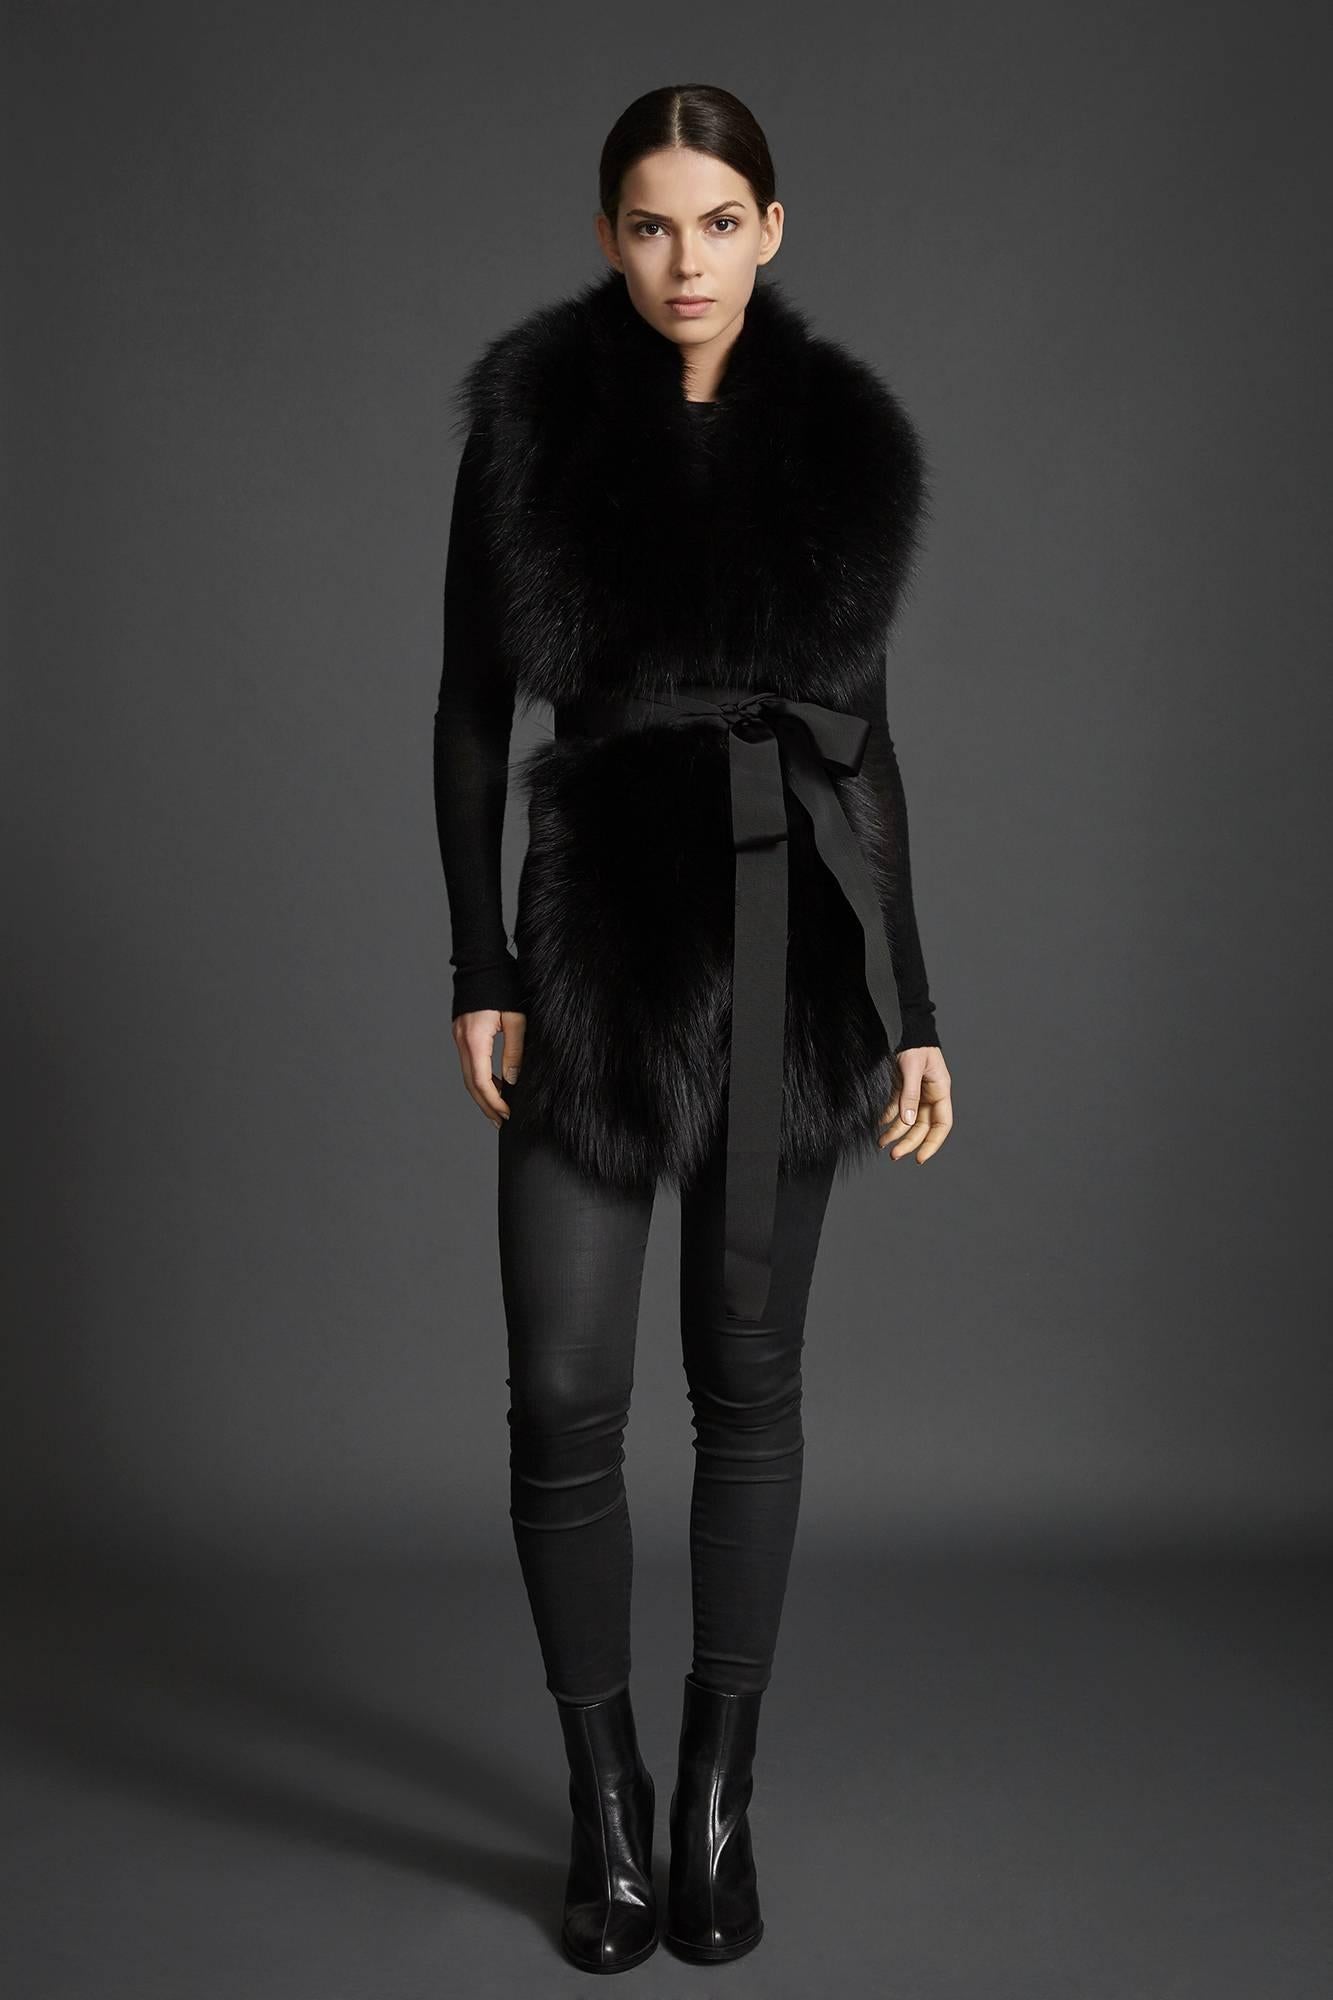 
The Legacy Stole is Verheyen London’s versatile design to be worn from day to night. Crafted in the finest dyed blue fox fur and lined in coloured silk satin.  A structured design to wrap over your shoulders for a statement look with or without a